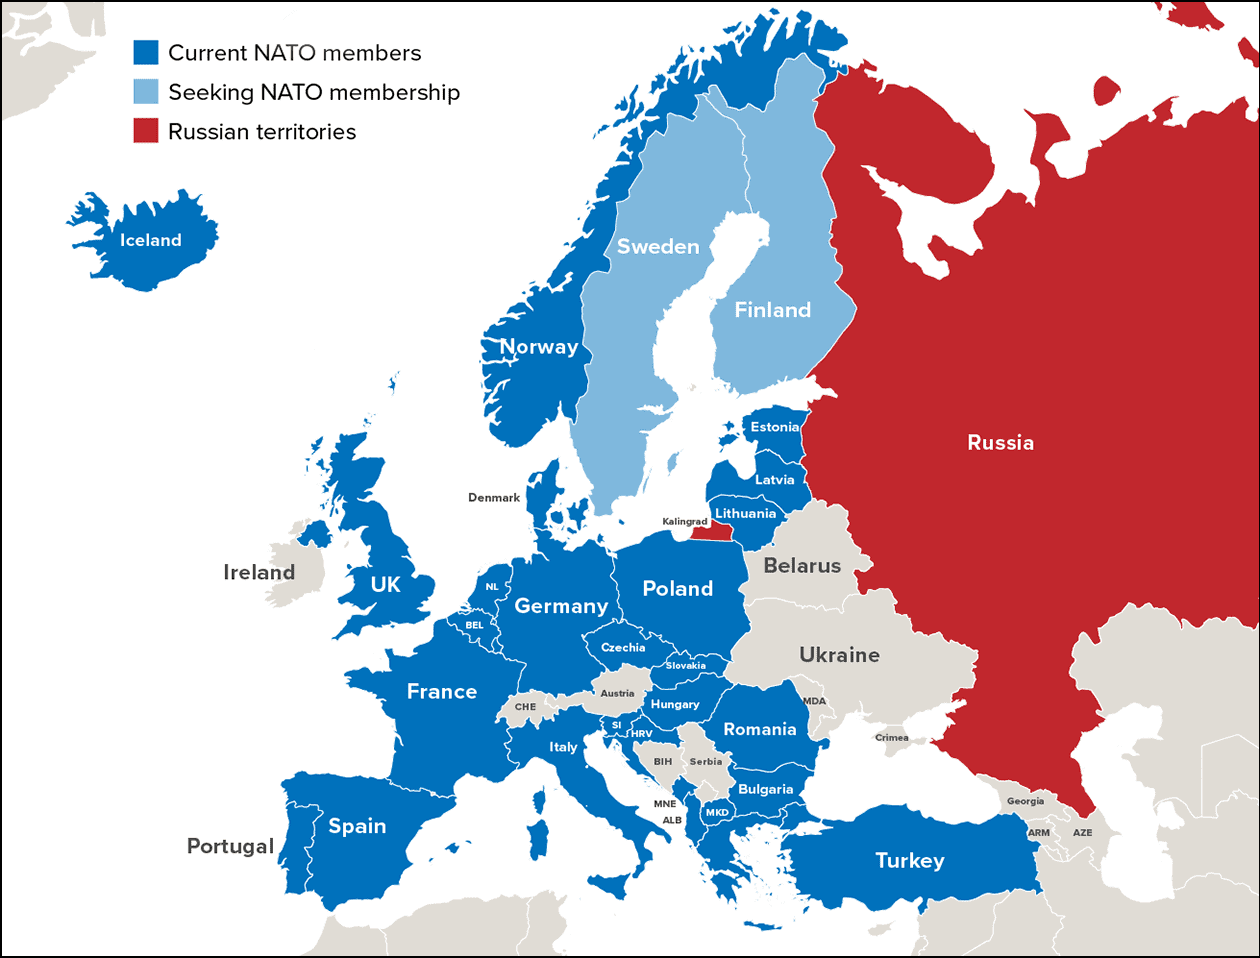 As of 2022, NATO has expanded to let in three former Soviet states and all of the former Warsaw Pact countries.